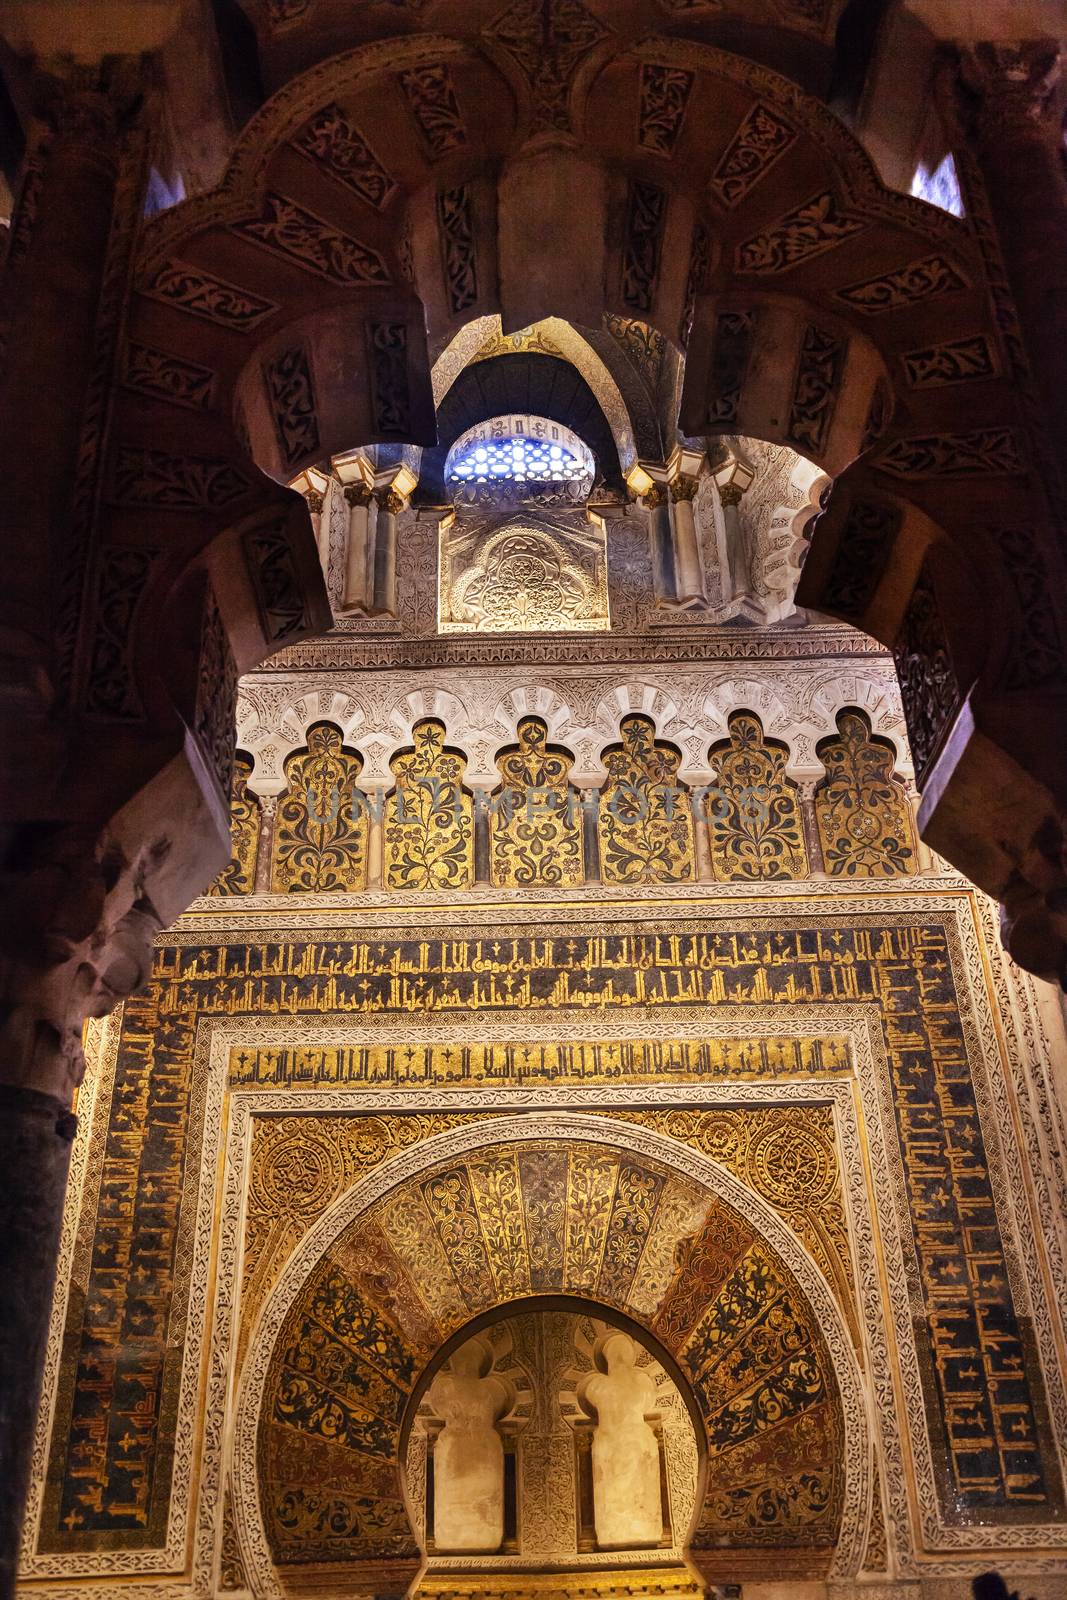 Mihrab Moslem Islam Prayer Niche Arches Mezquita Cordoba Spain.  Mezquita Created in 785 as a Mosque. Mezquita converted to a Cathedral in 1500. 